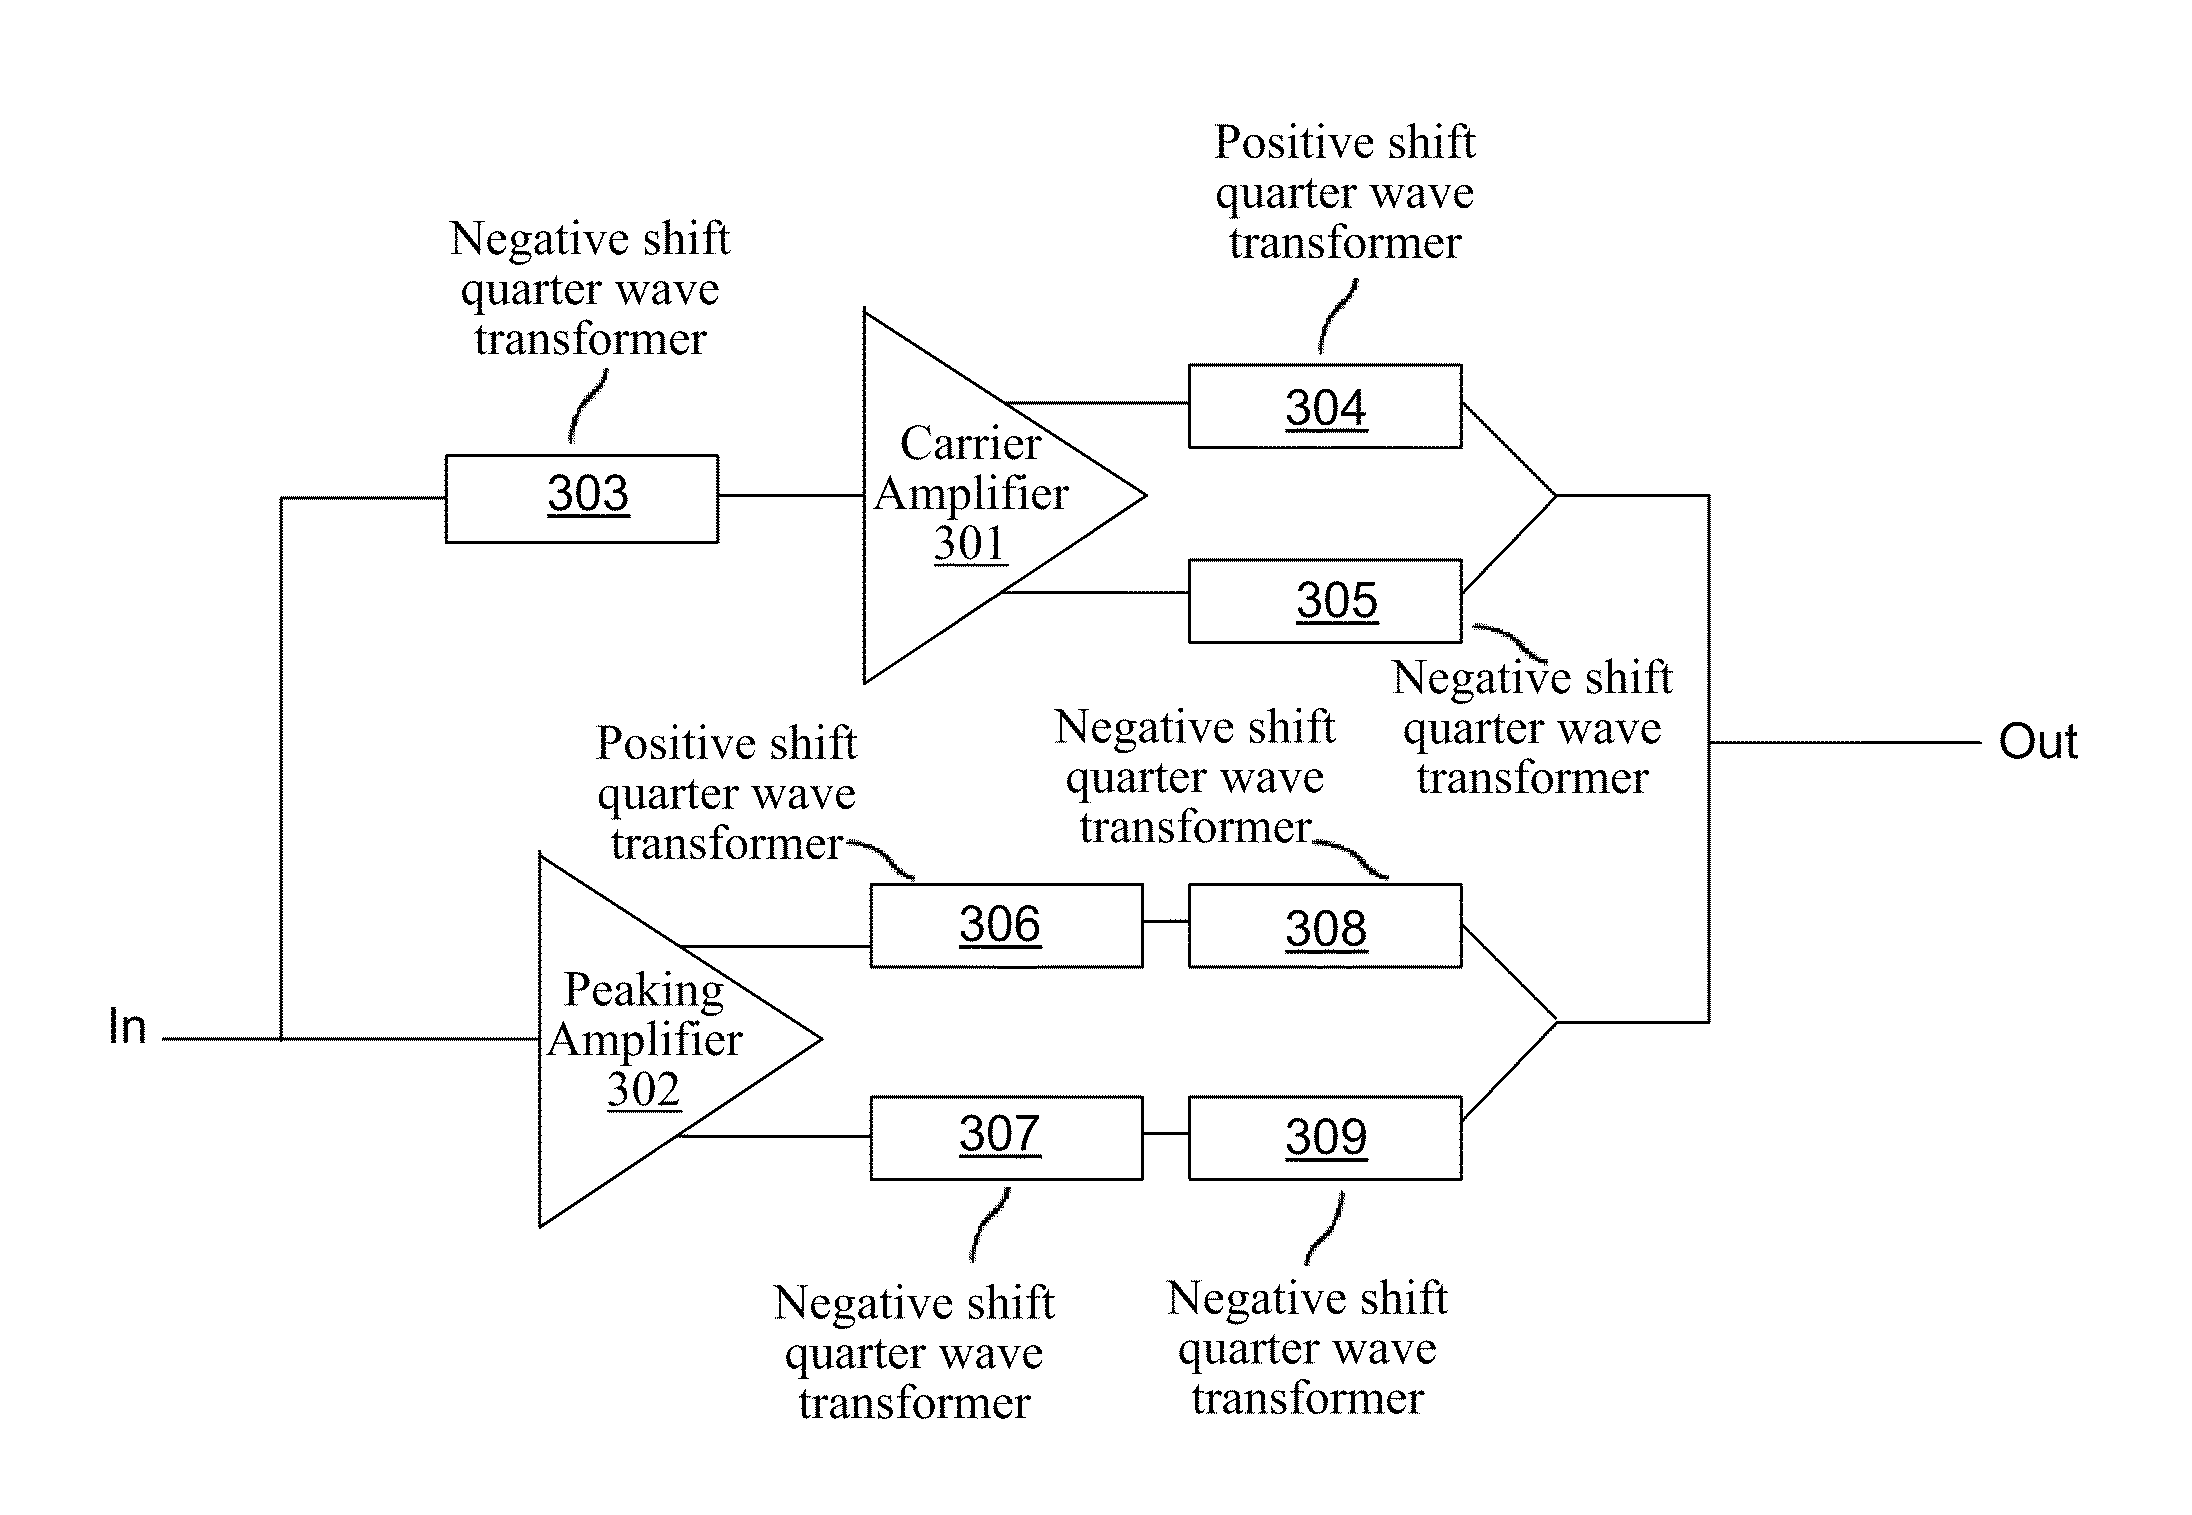 Integrated power amplifiers for use in wireless communication devices